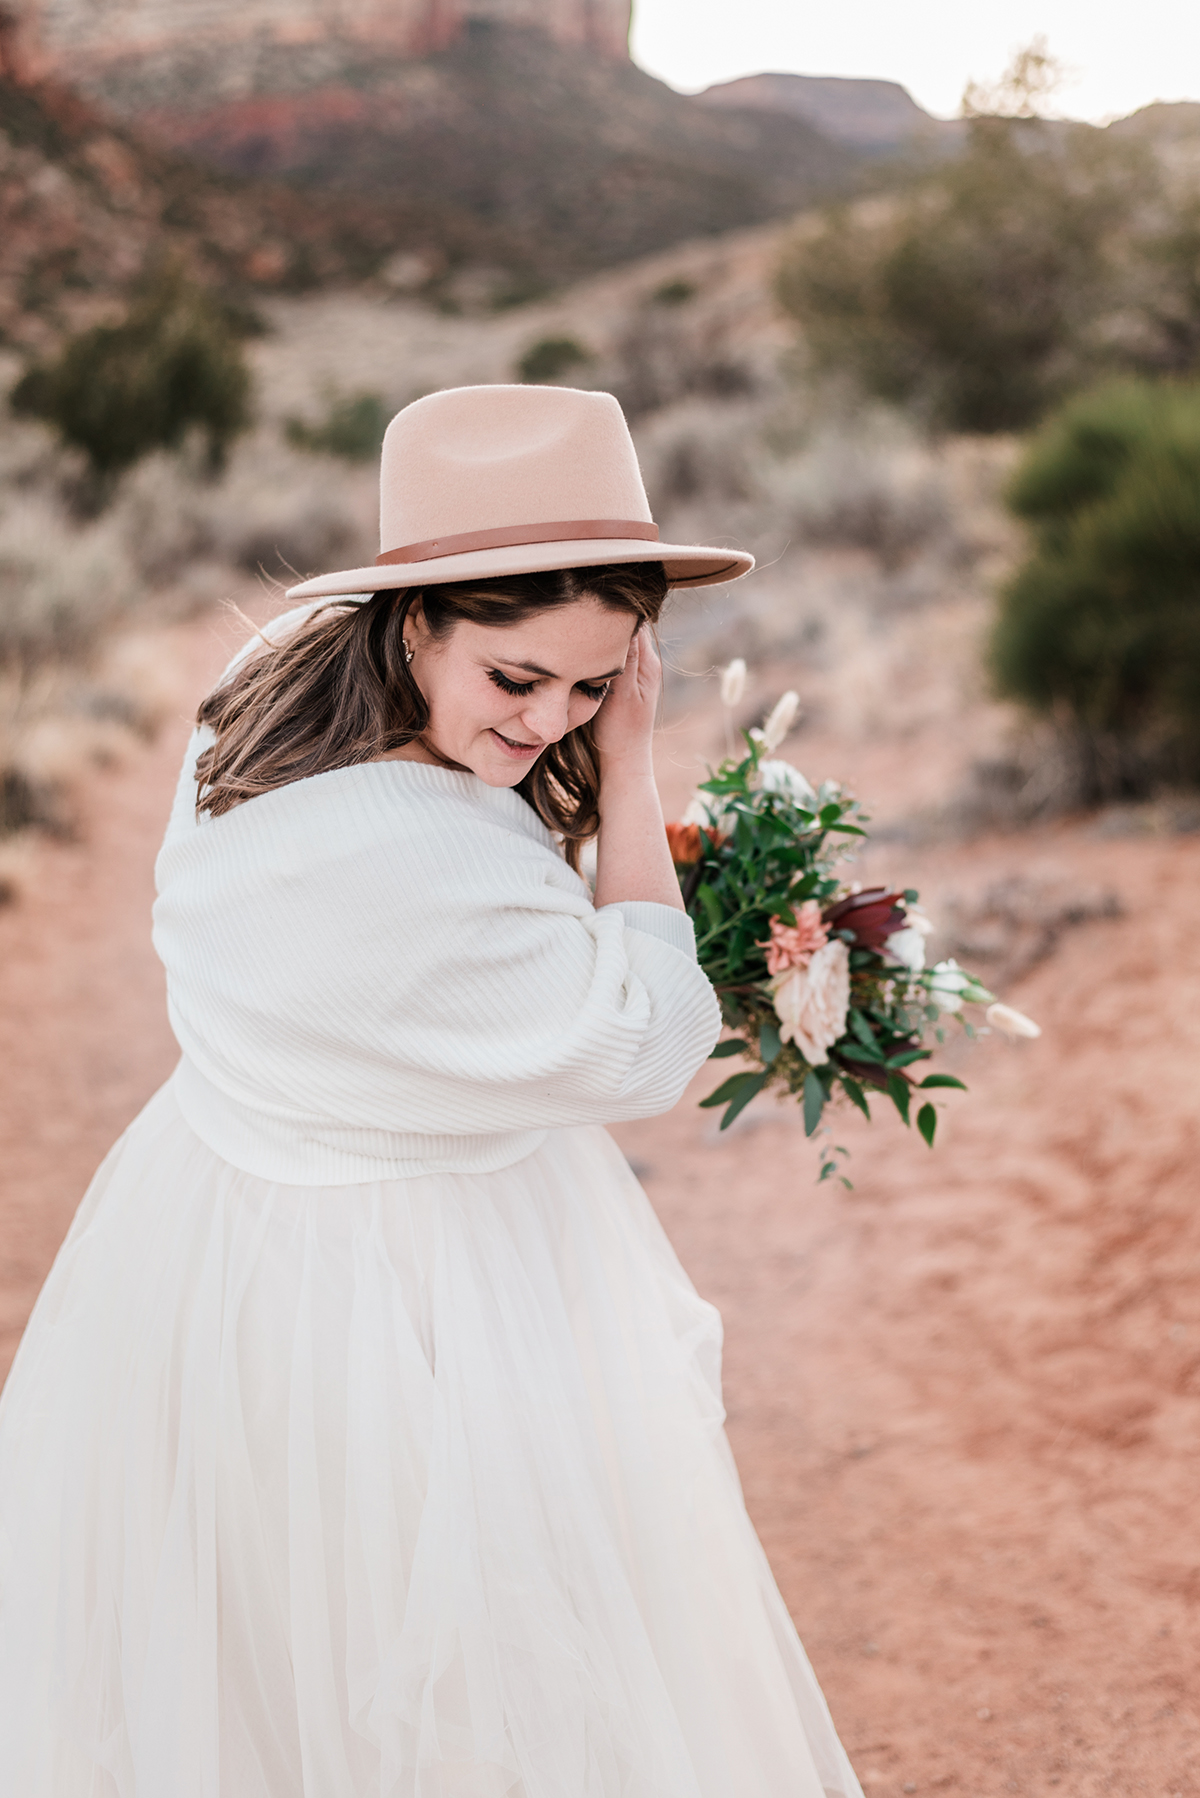 Bride with a shawl and hat on in the desert